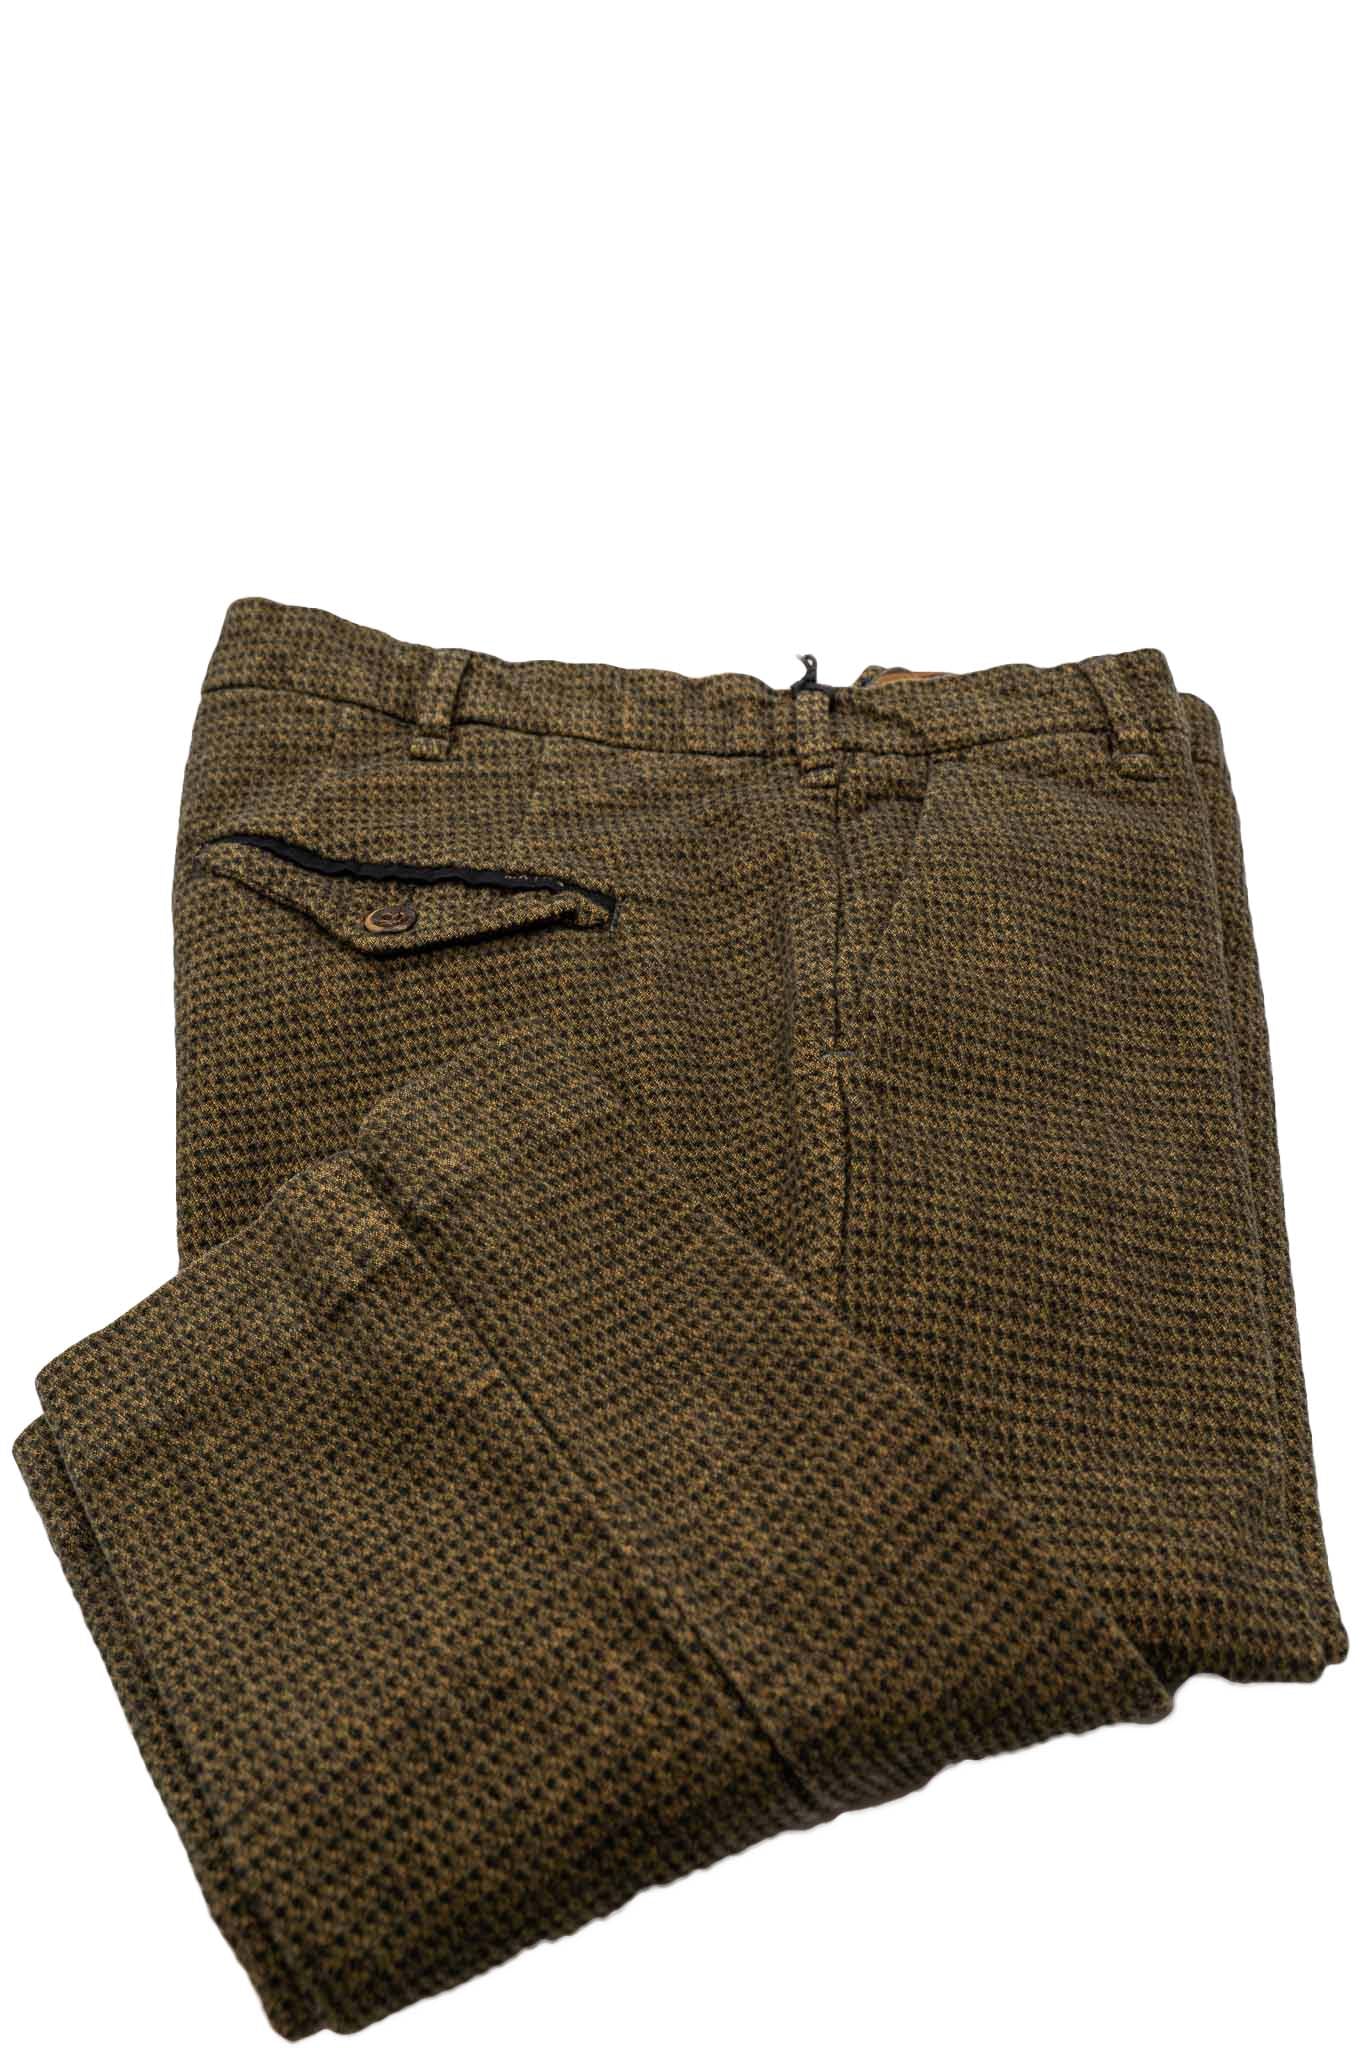 Micro hounds-tooth chinos